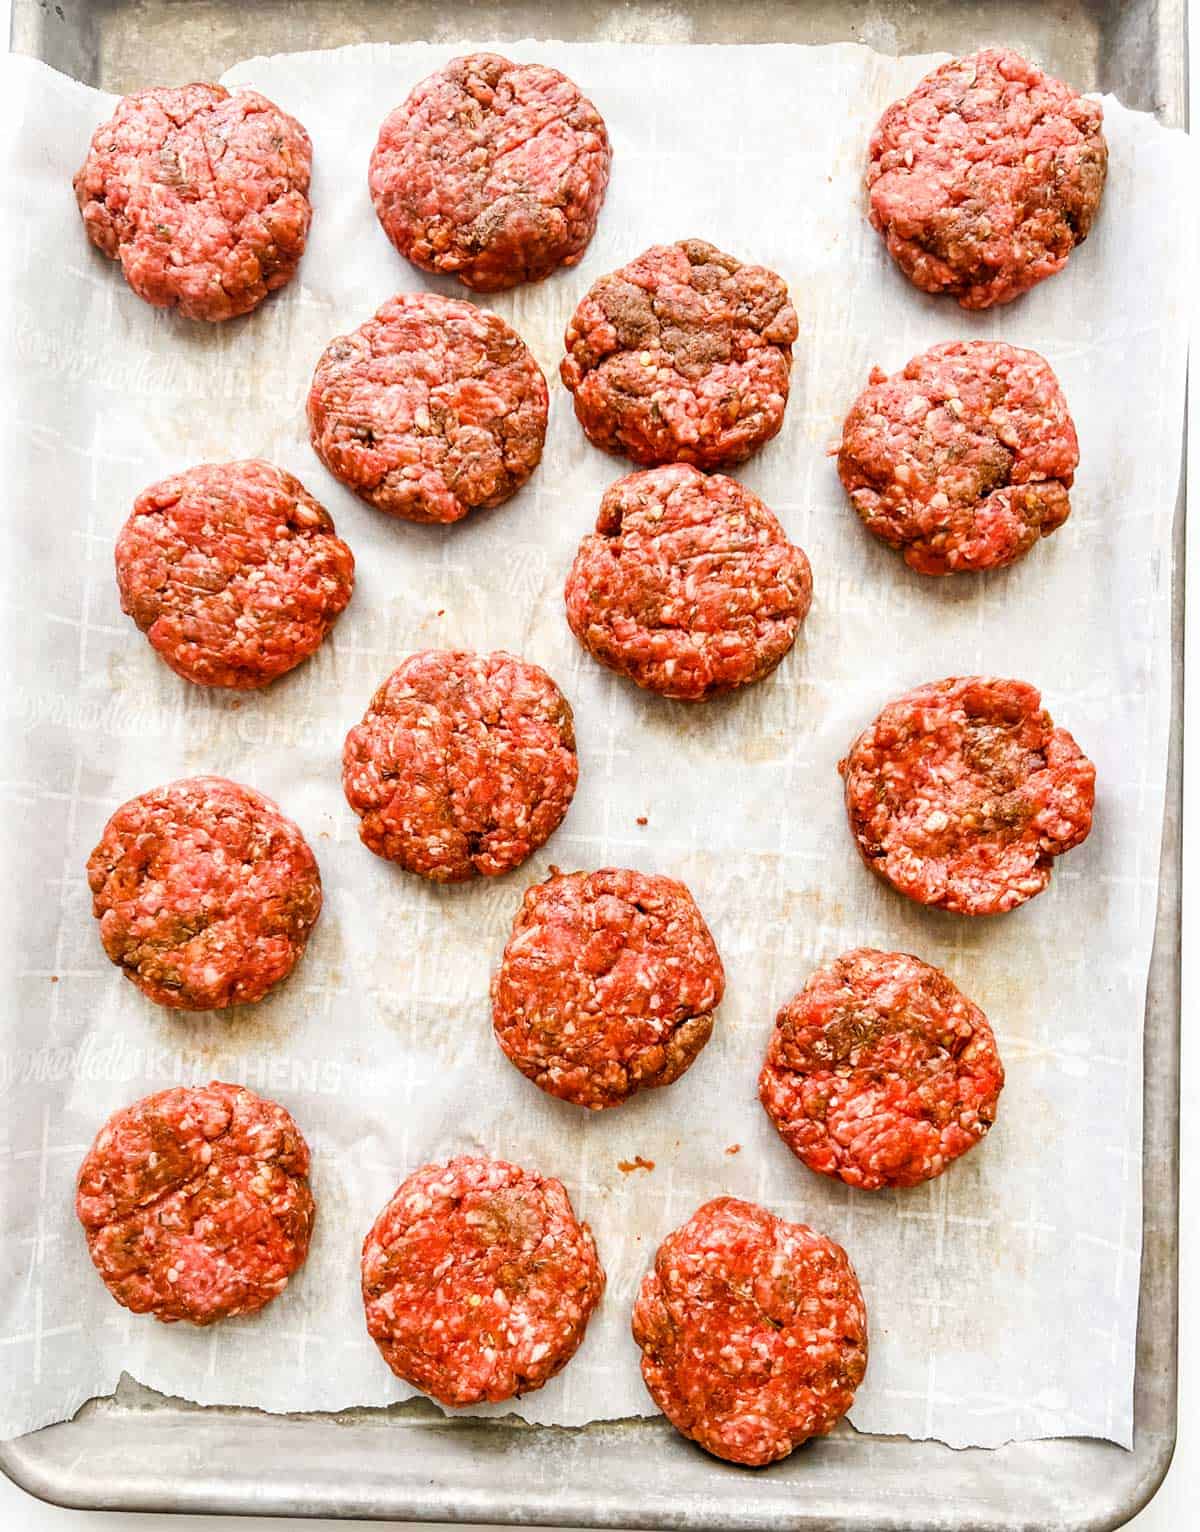 A parchment lined baking sheet with uncooked sausage patties.